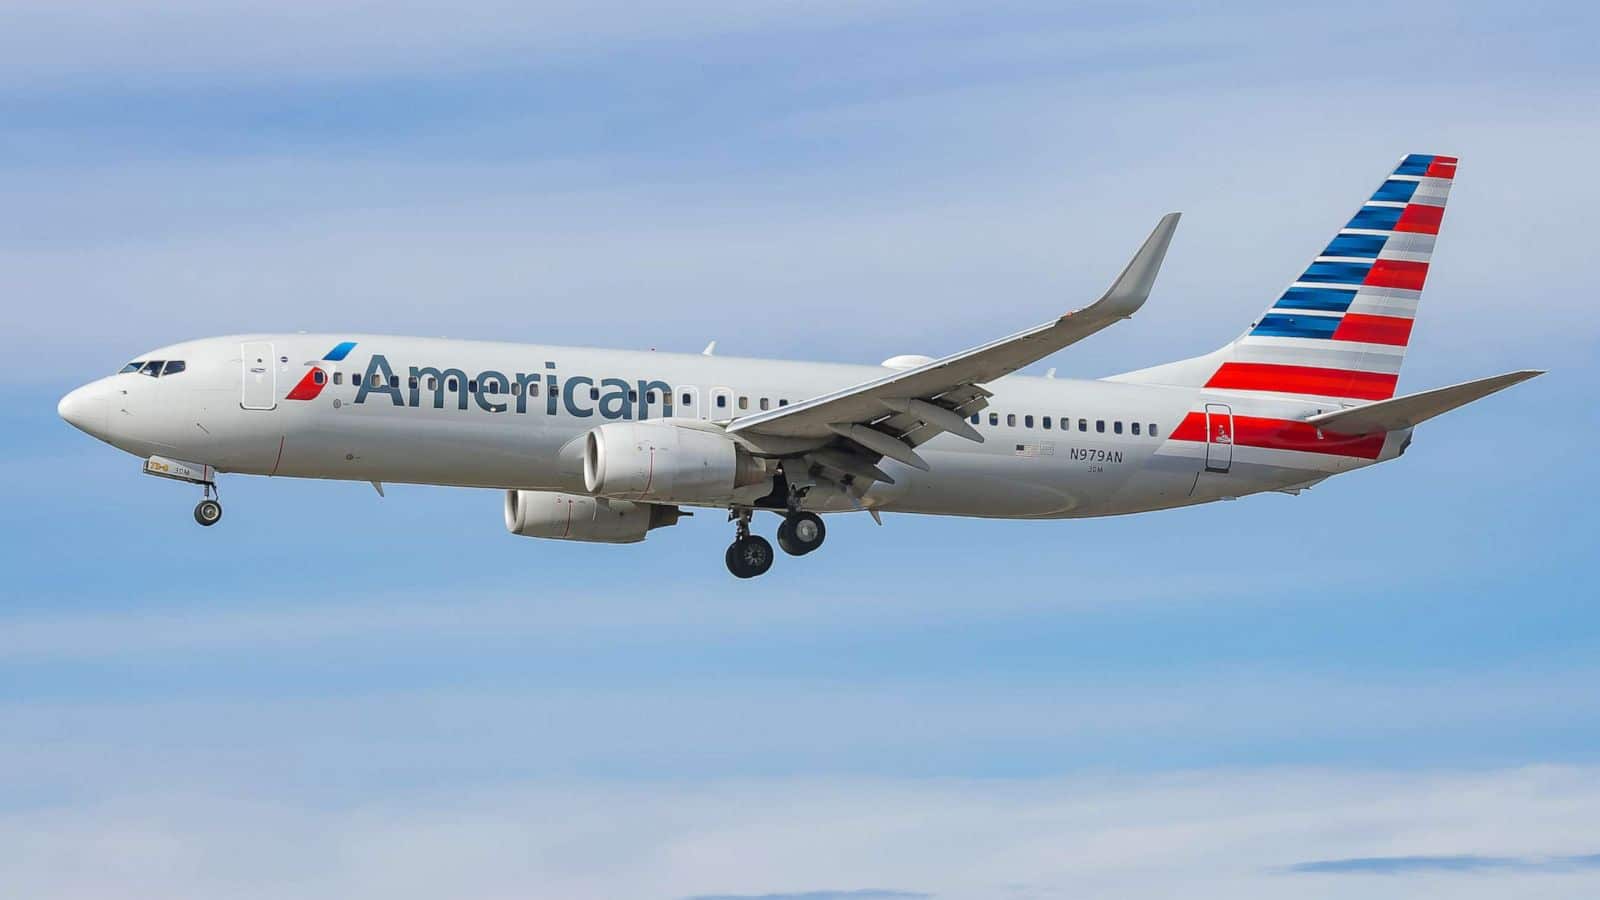 american-airline-04982d05